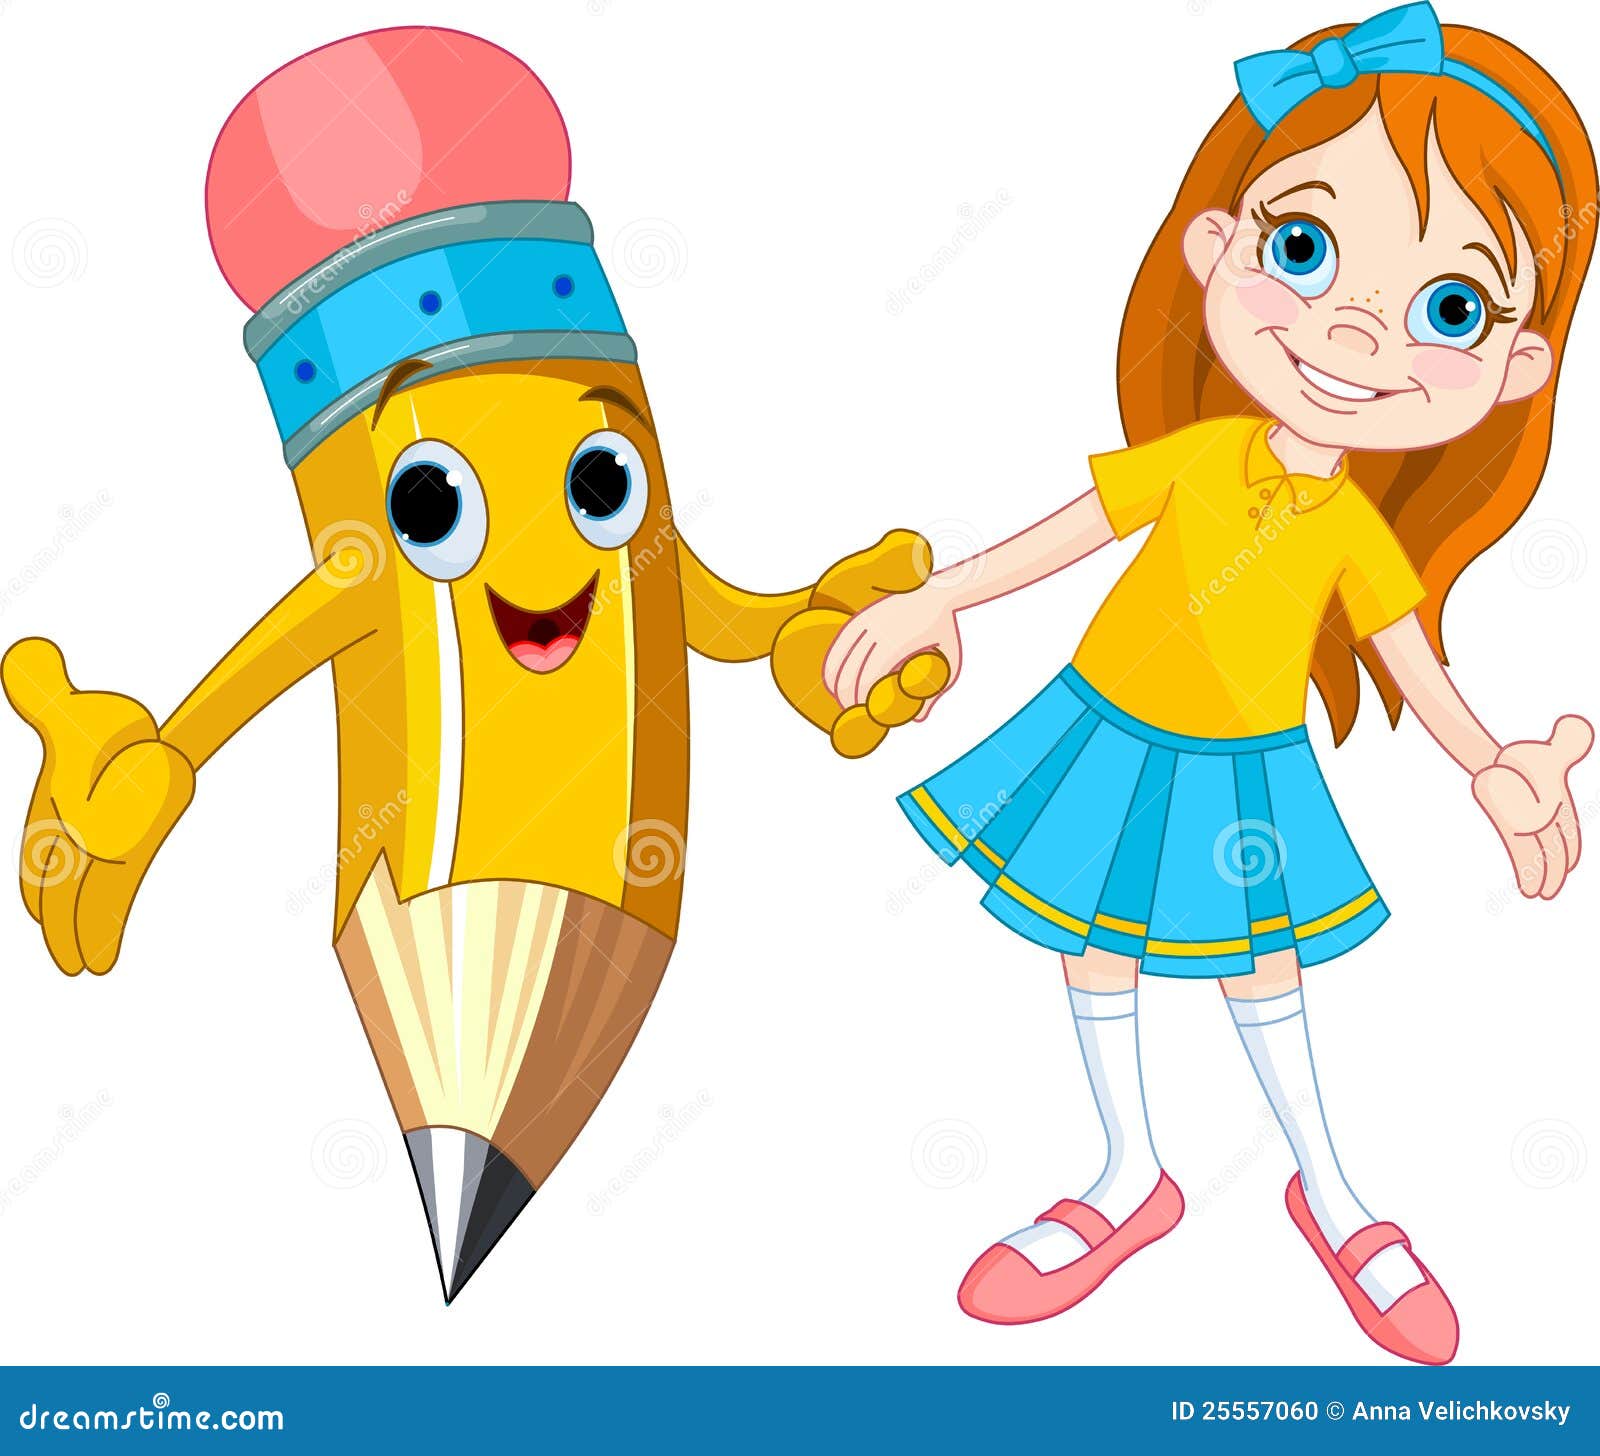 Girl and pencil stock vector. Illustration of happiness - 25557060